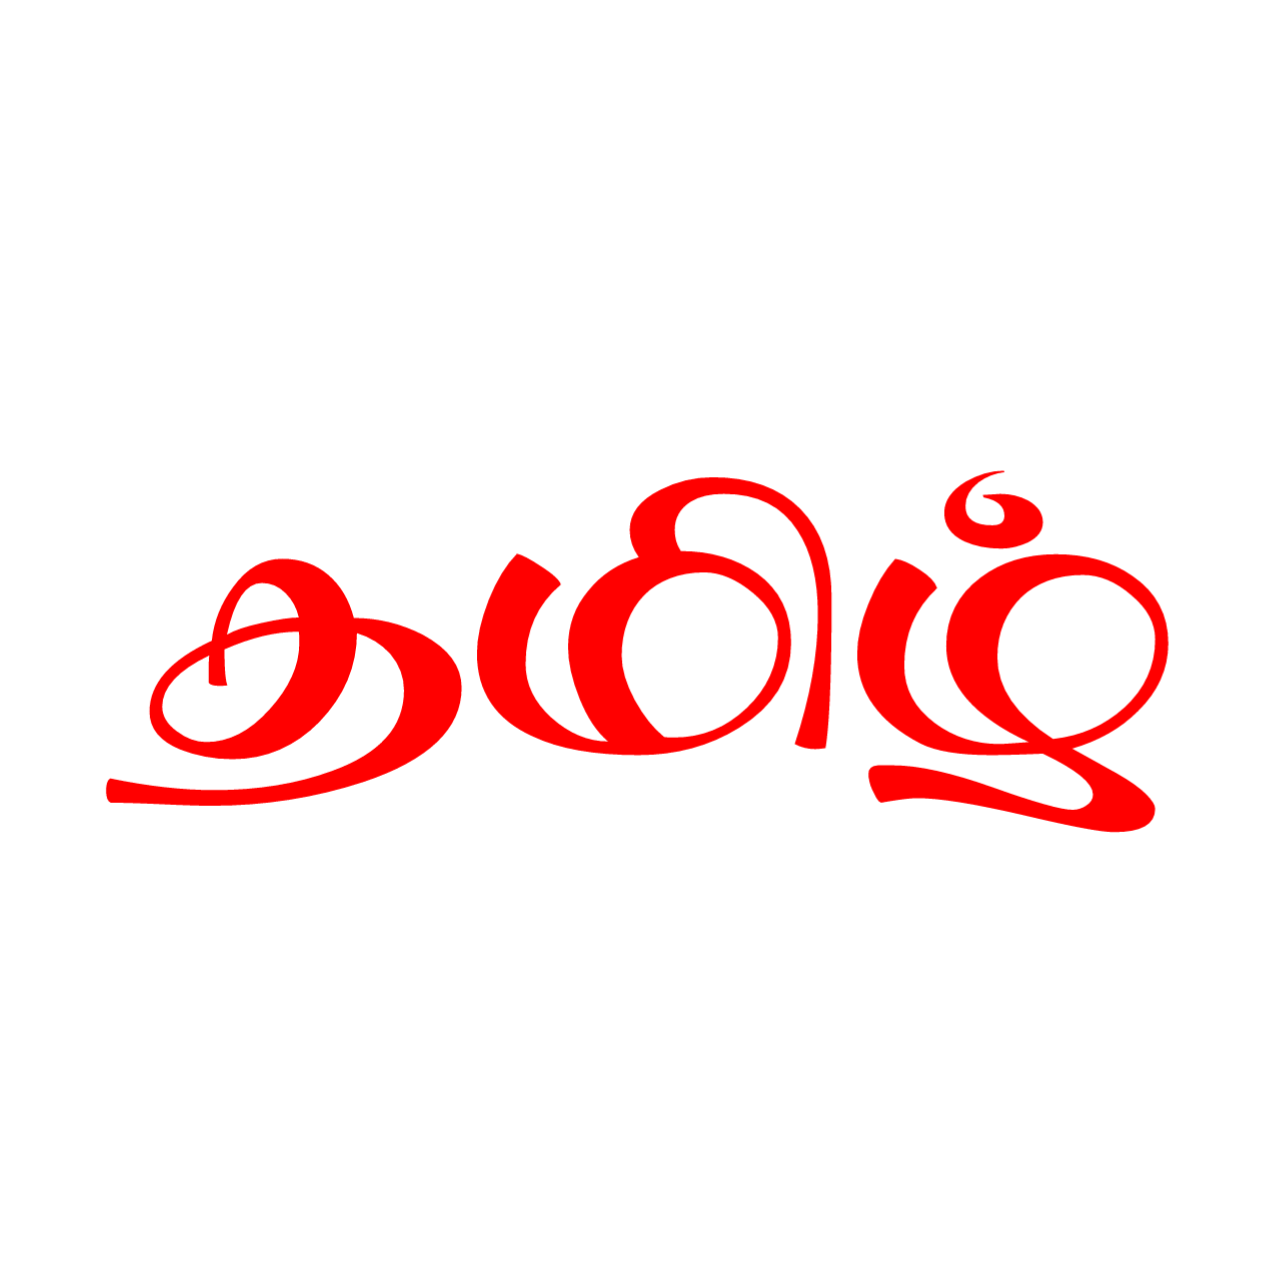 Download Tamil font ttf collection free download